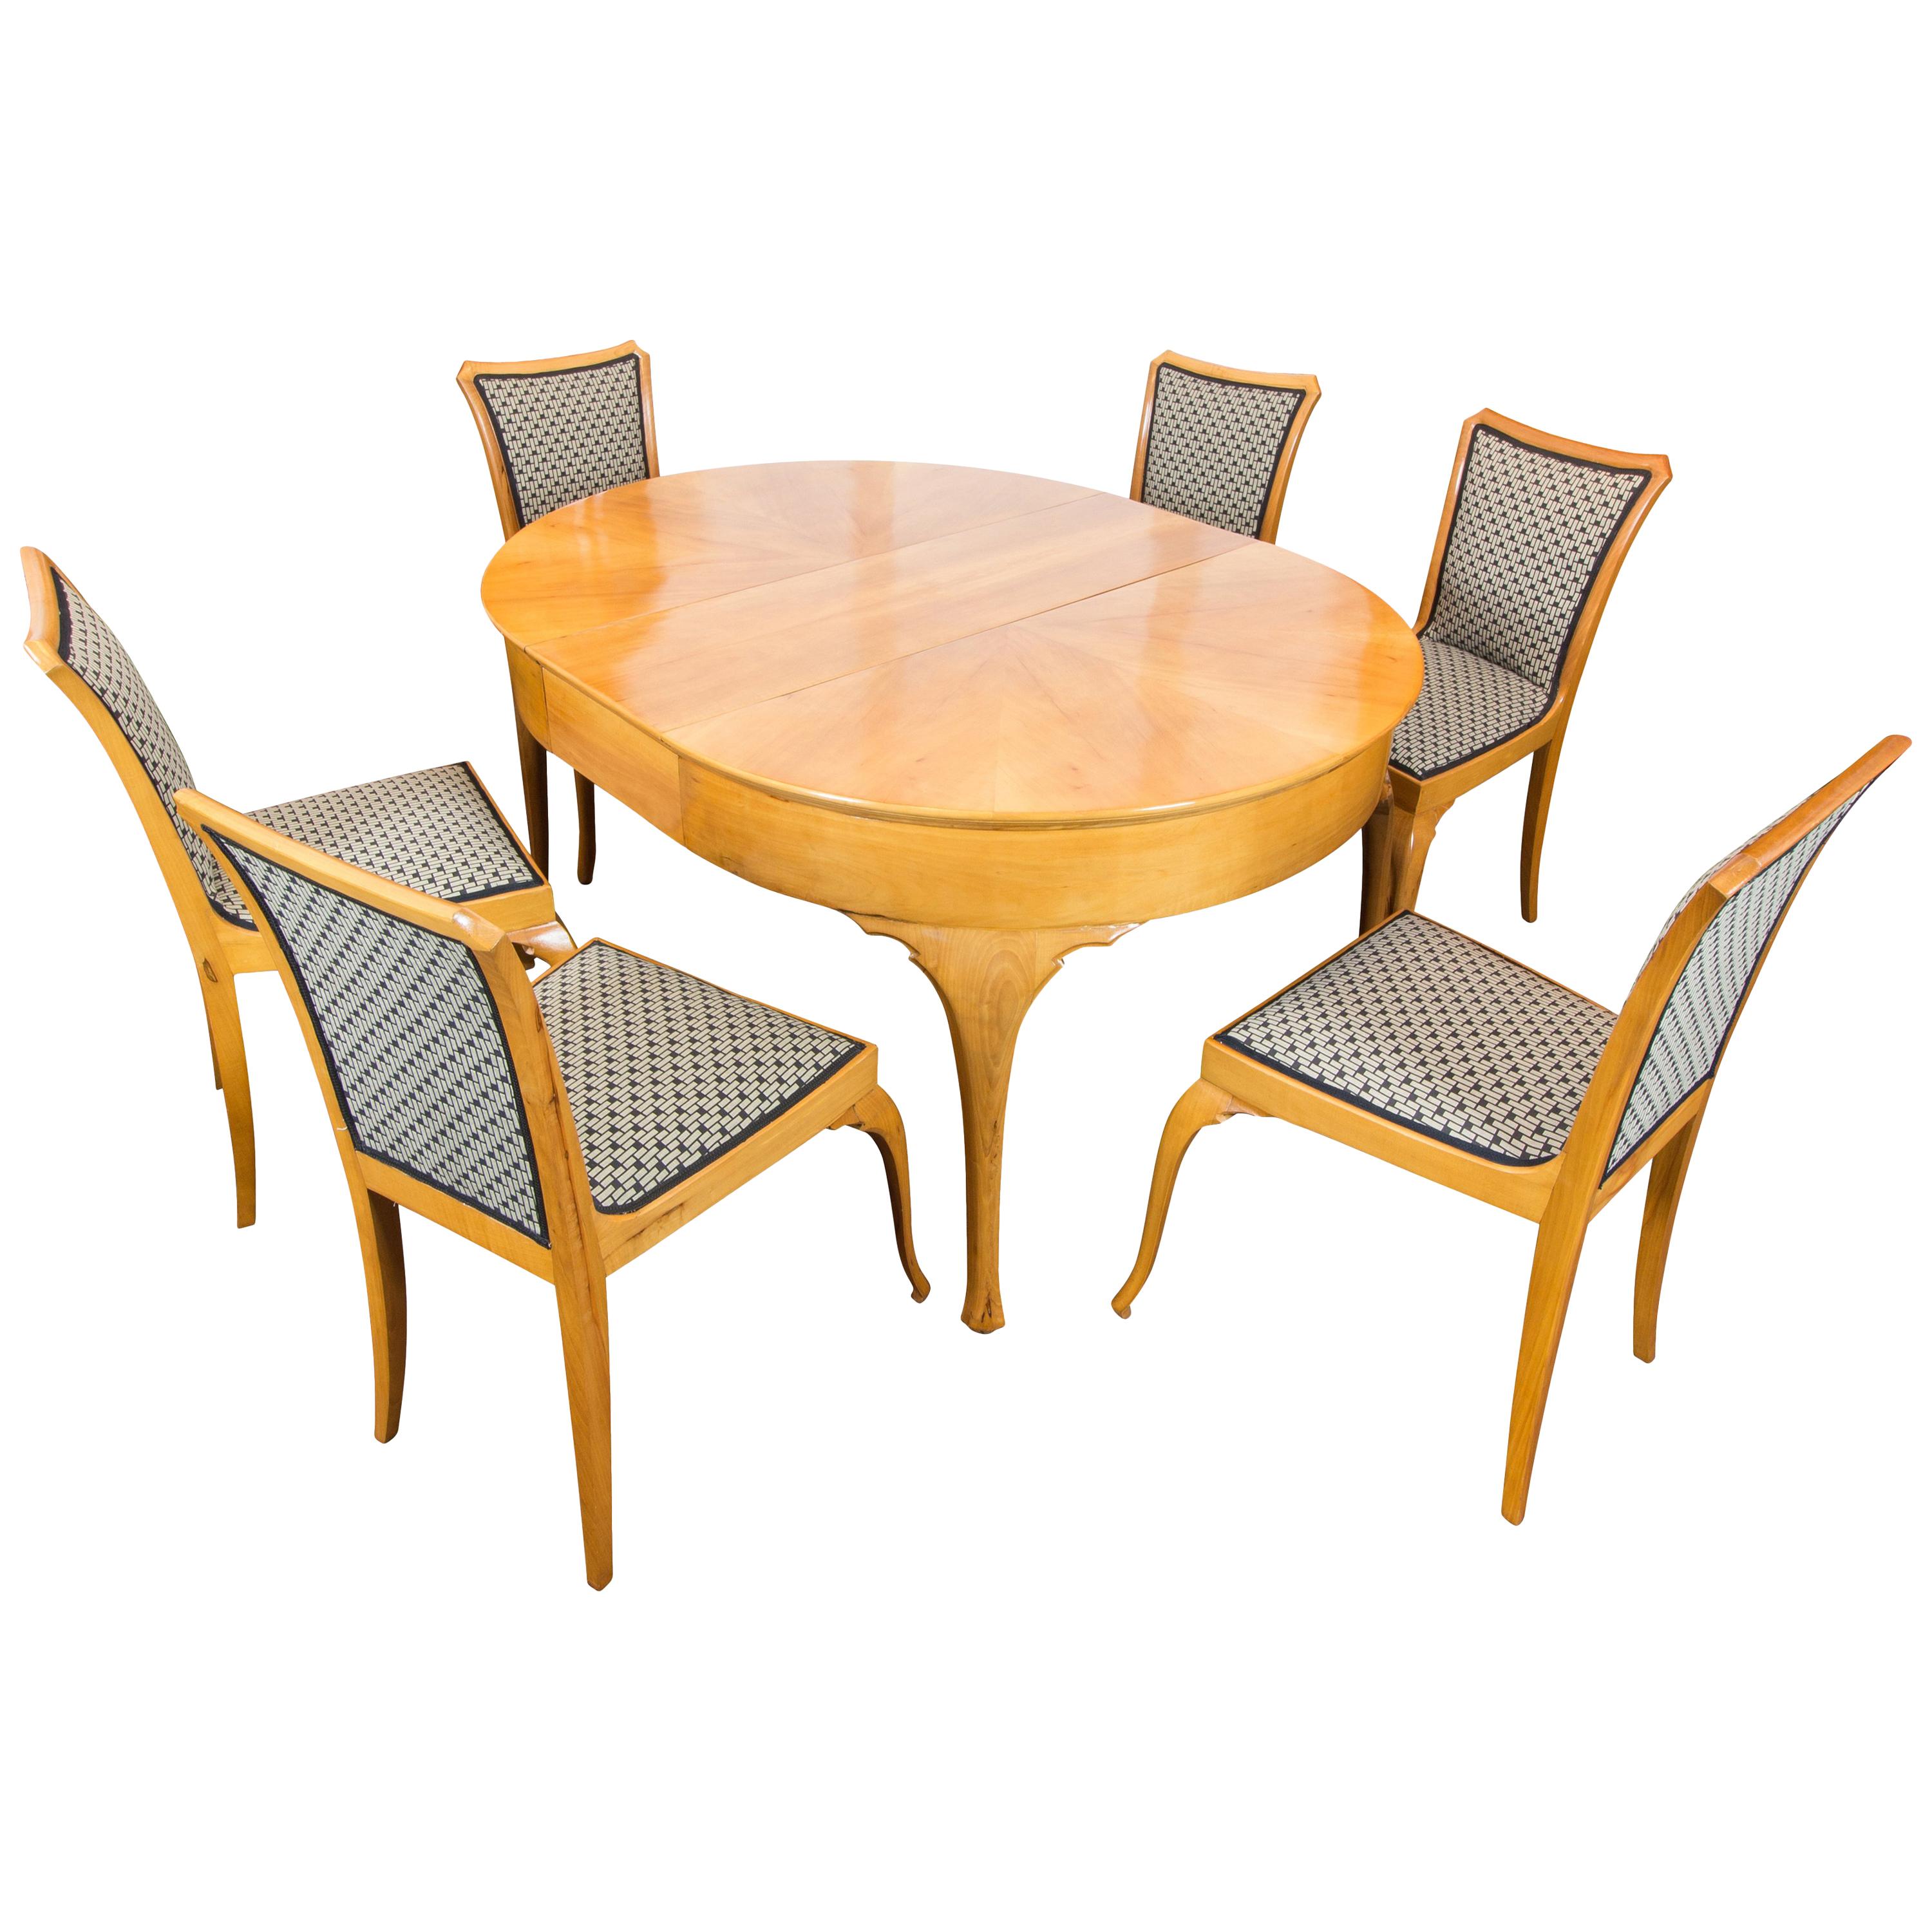 Art Deco / Art Nouveau Pearwood Dinning Set: Table and Set of Six Chairs